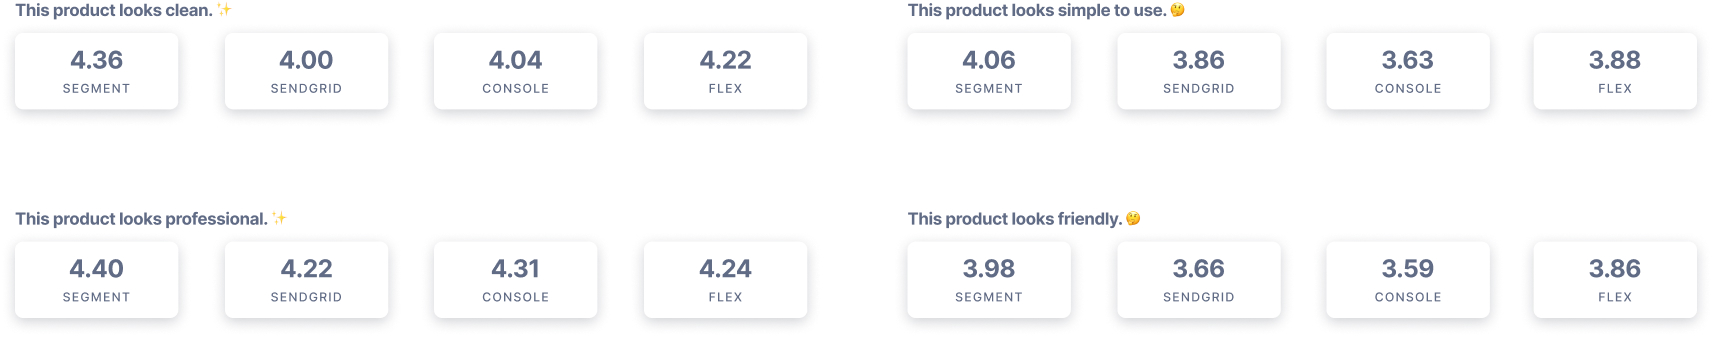 A detailed breakdown by product for our likert scale questions.